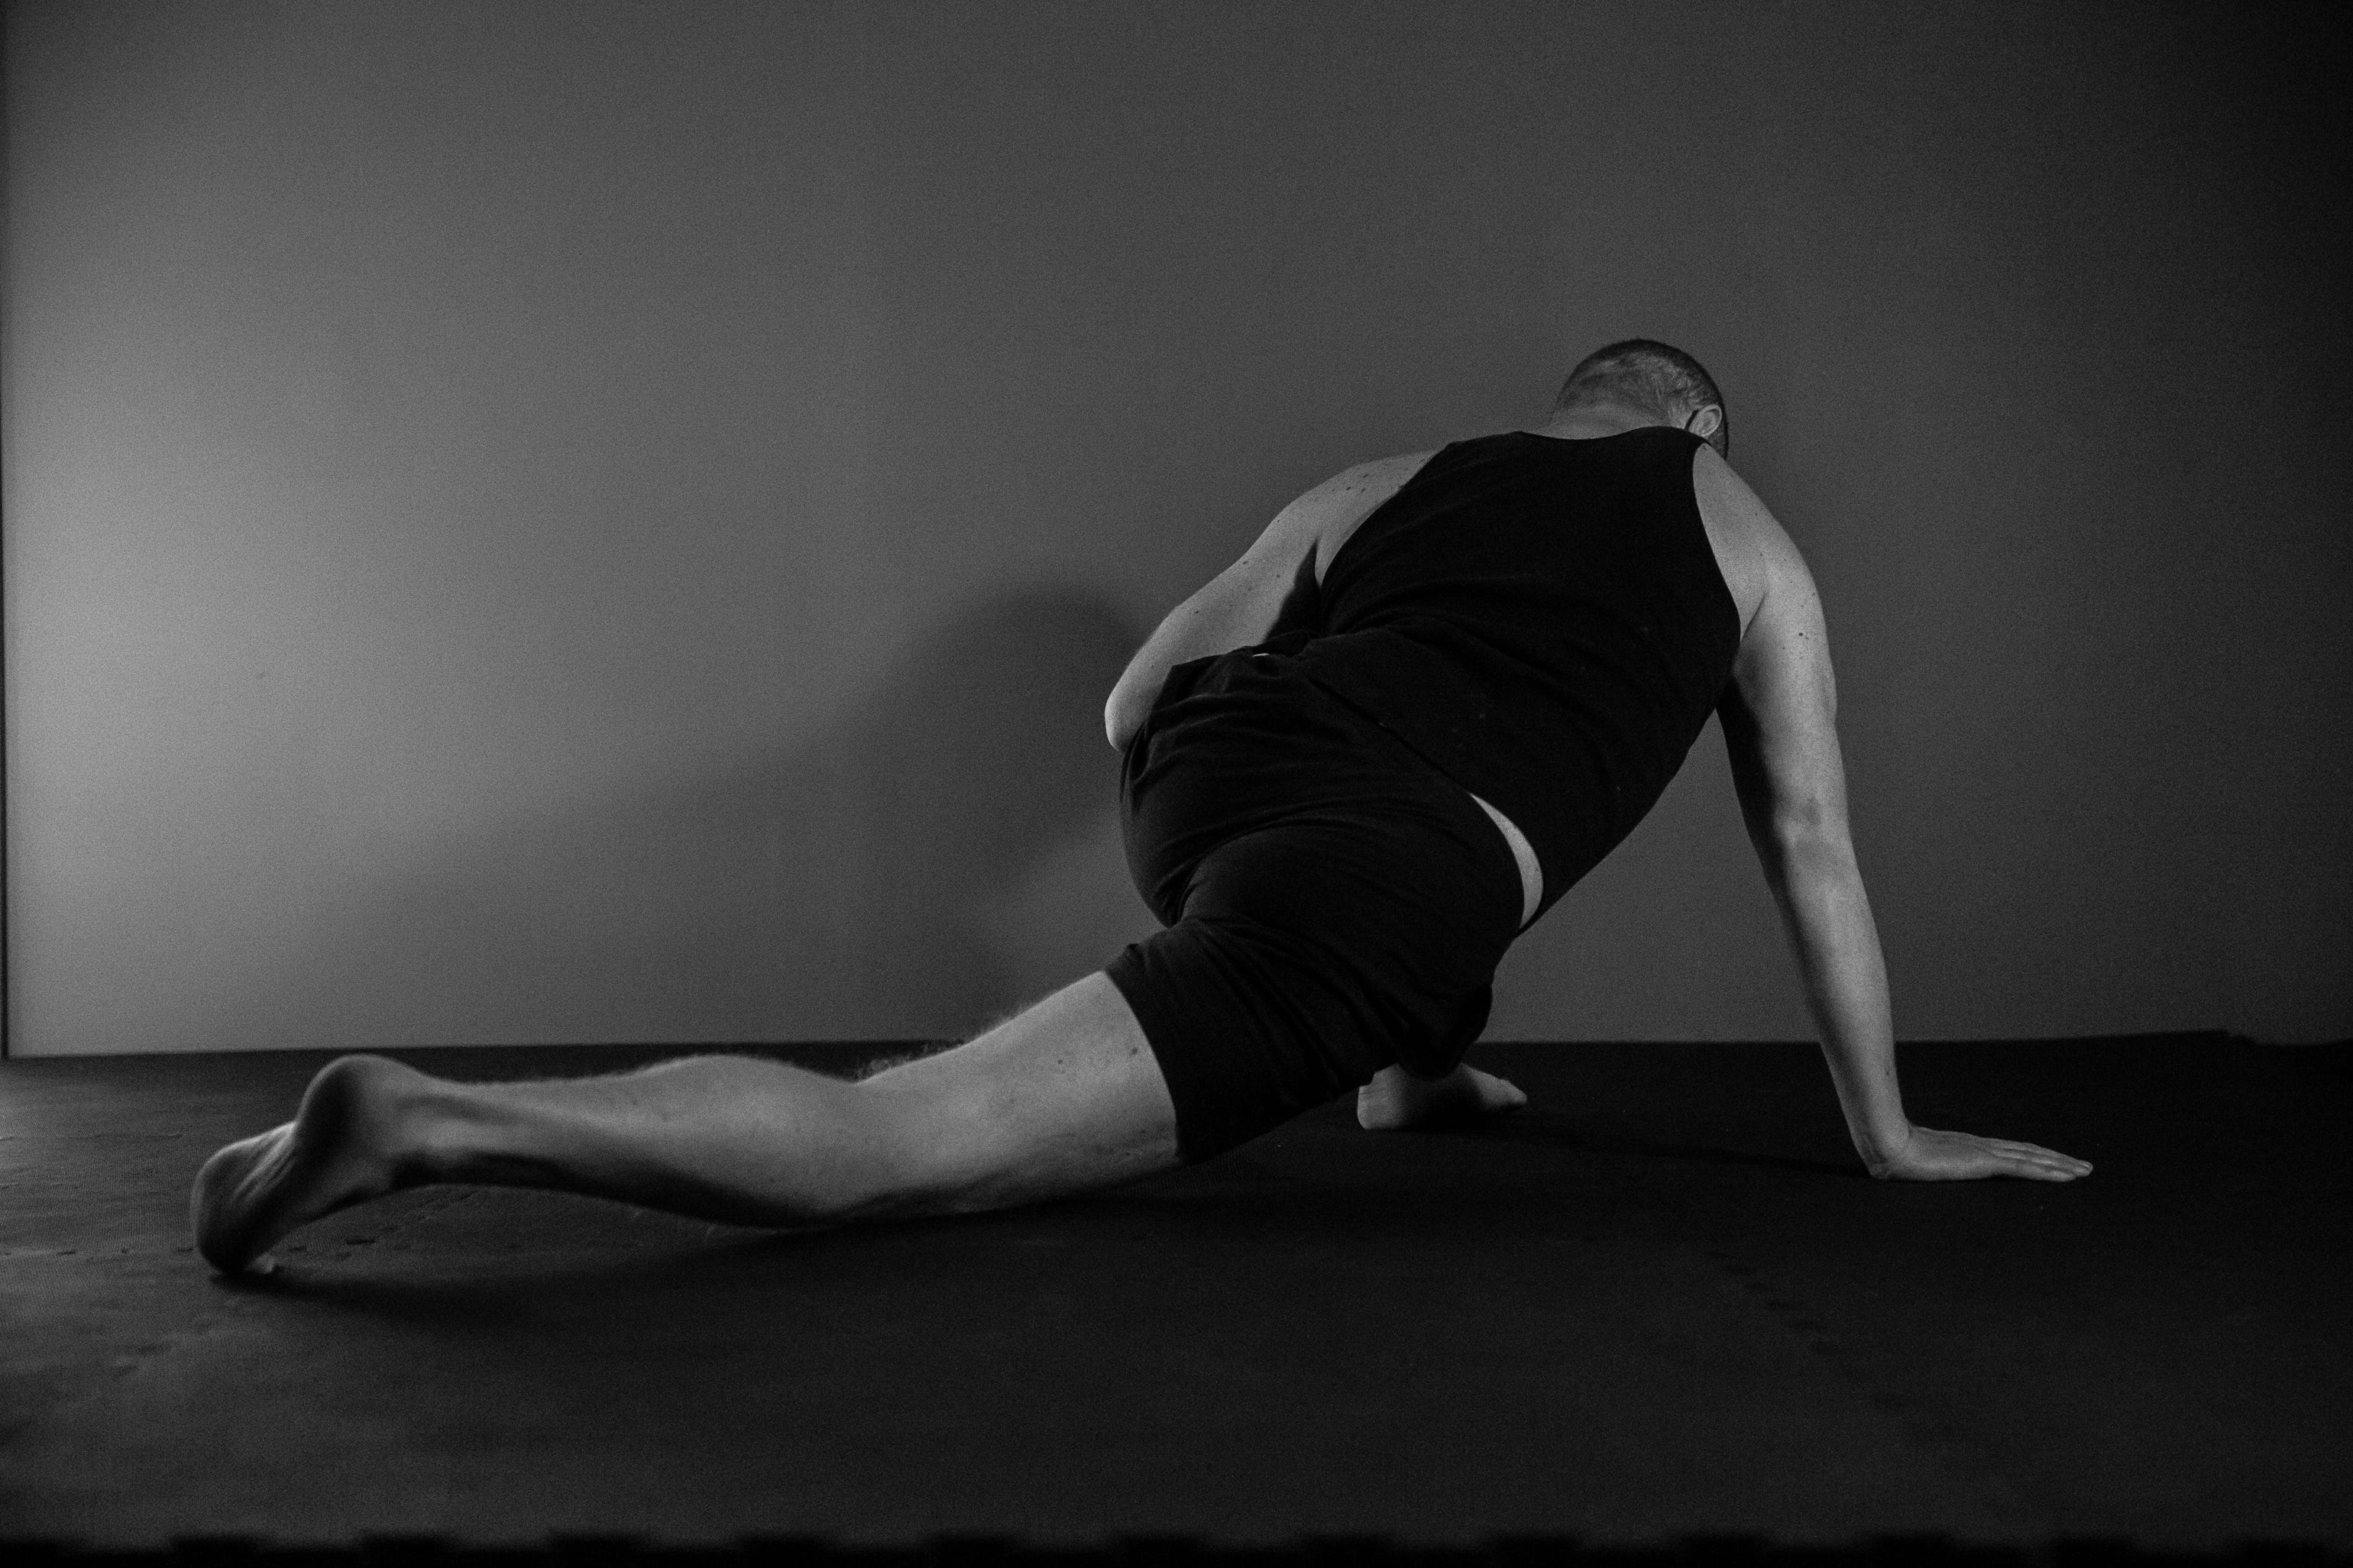 Sequence Of IT Band And TFL Stretches For Athletes - Yoga 15